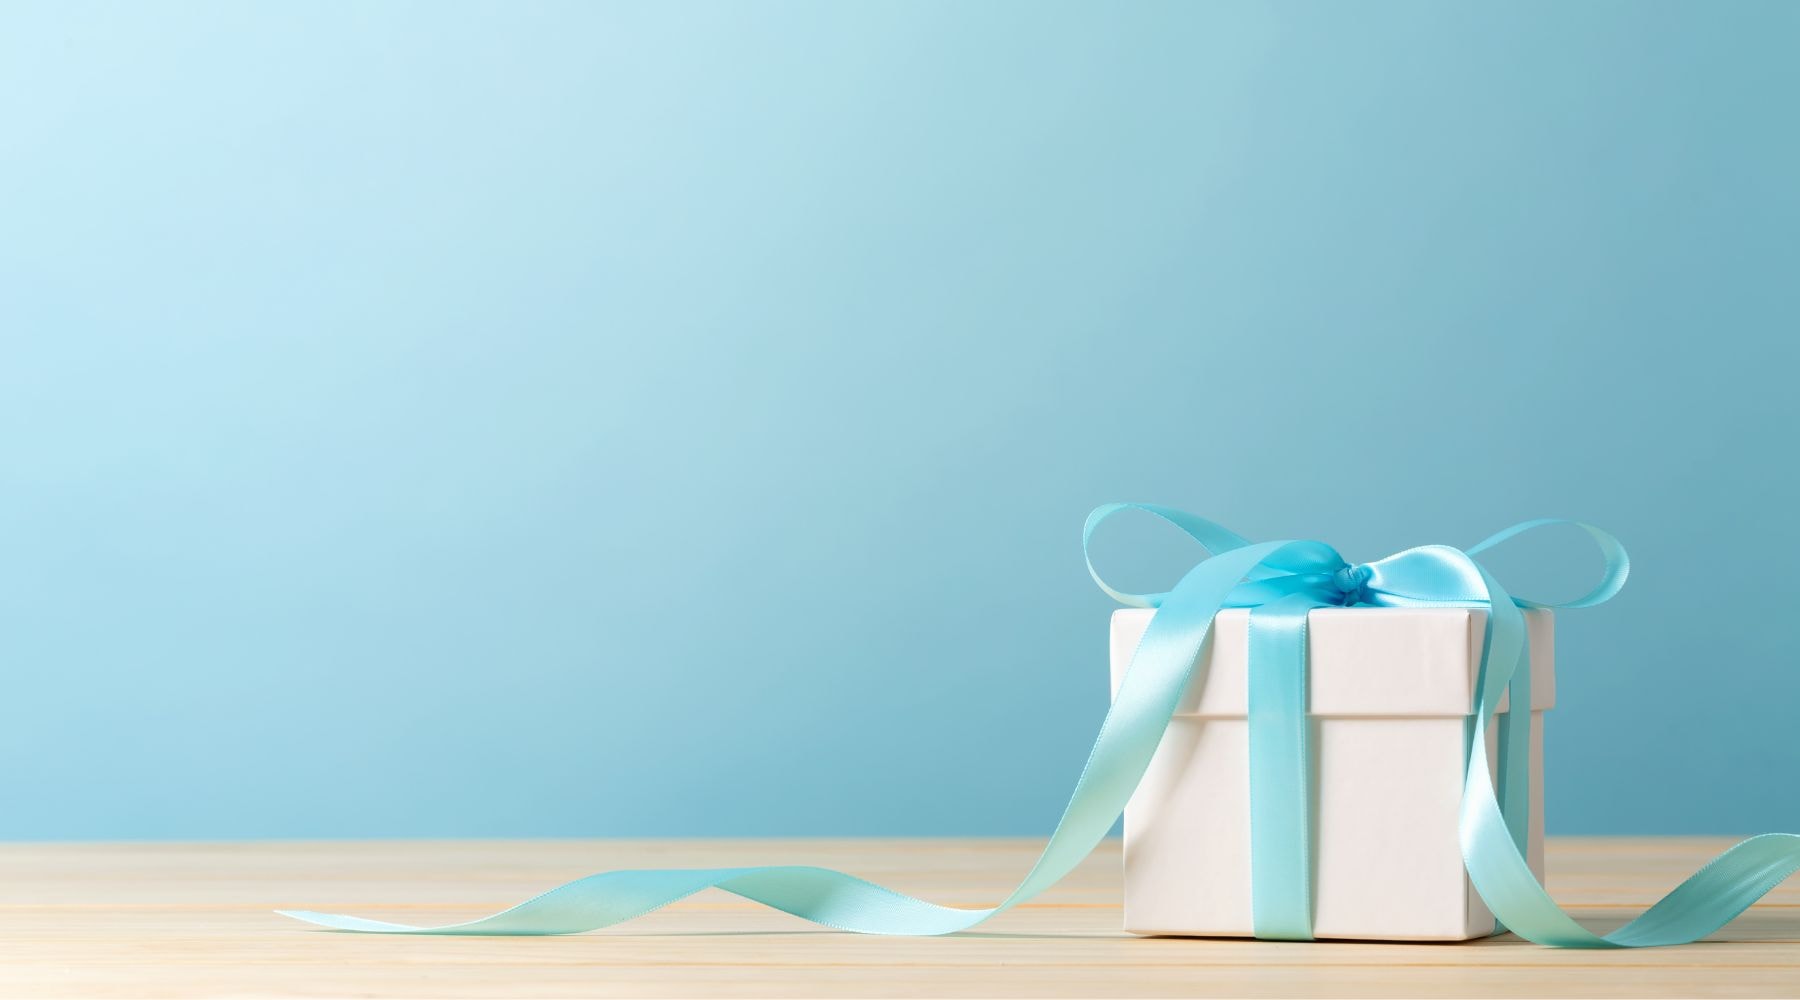 Simple white gift box with a teal ribbon on a wooden table against a soft blue background.